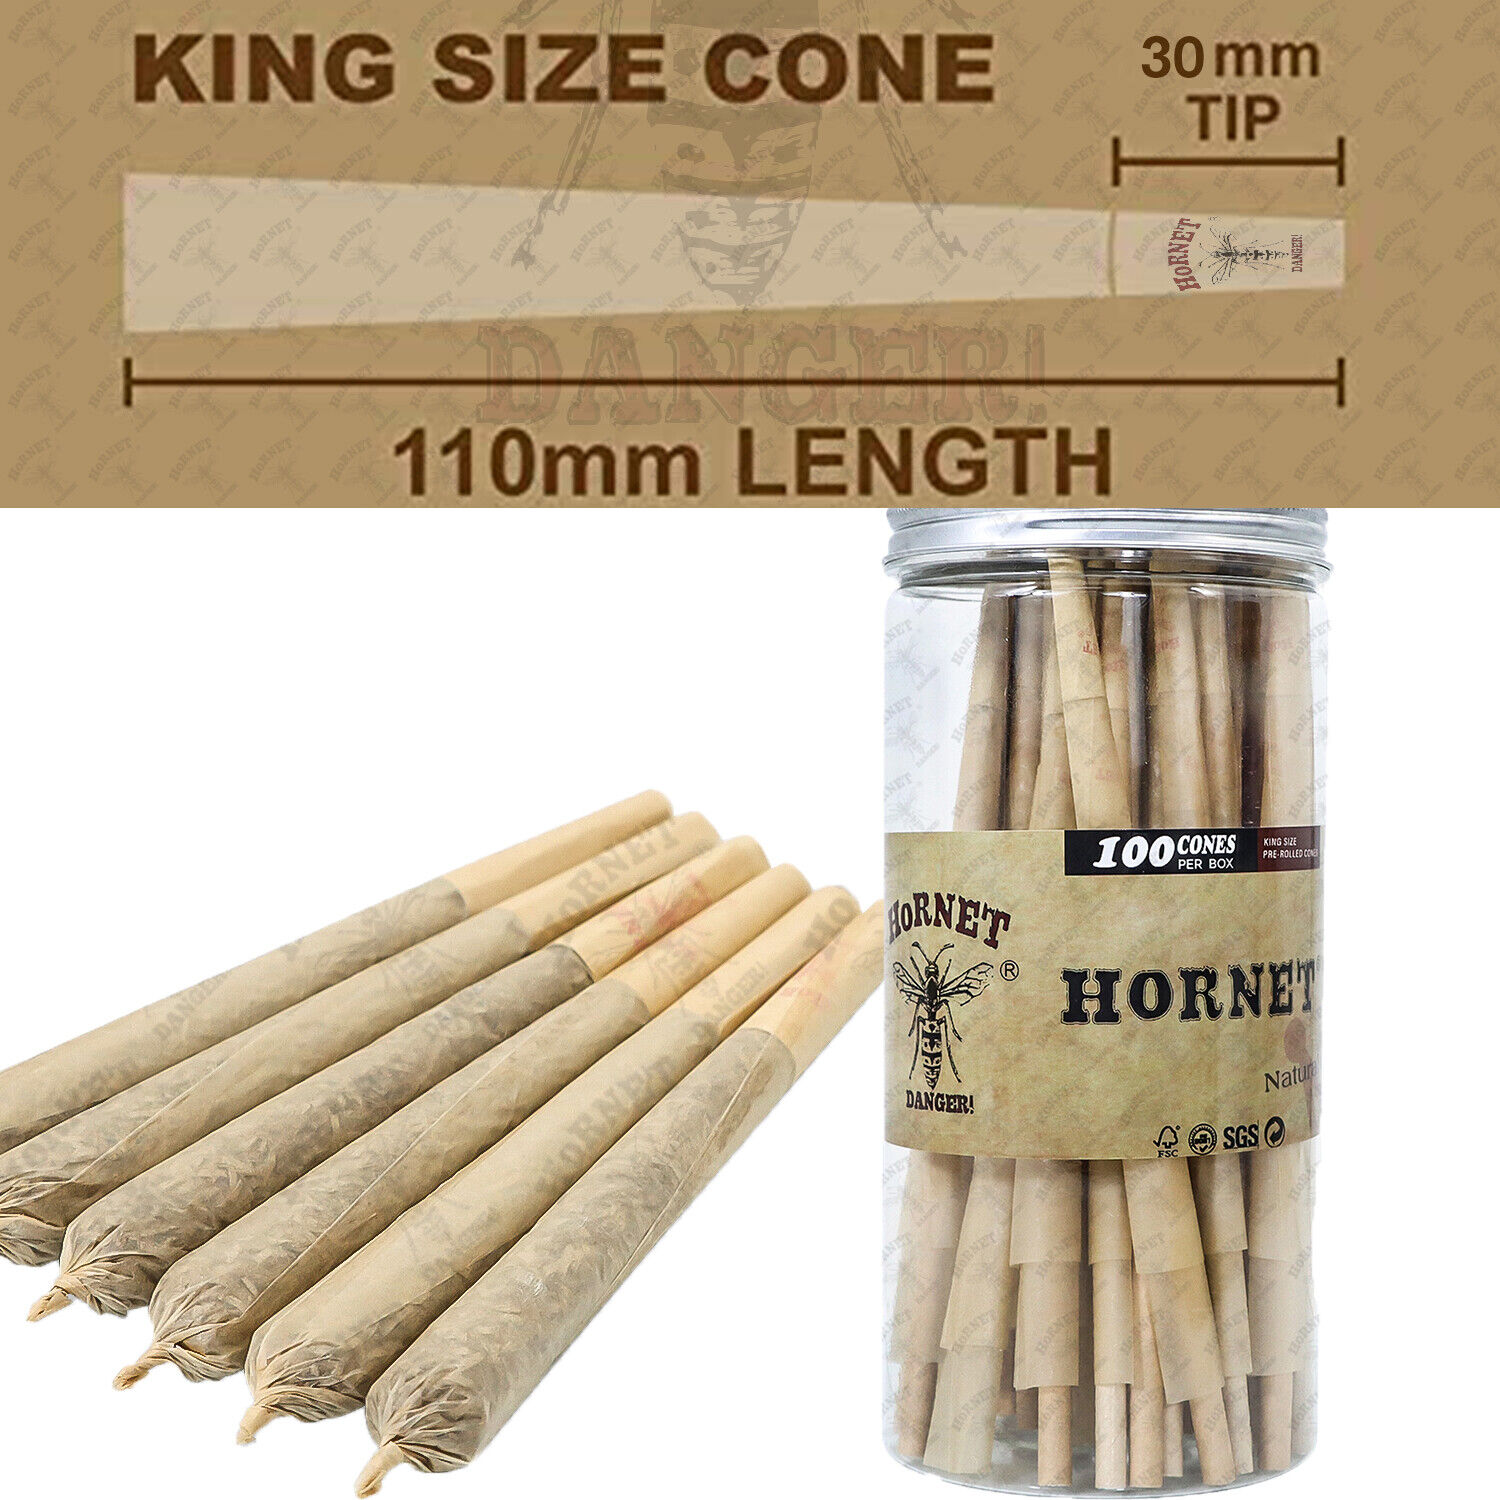 Authentic HORNET Cone King Size Pre-Rolled Cones W/Filter tips(102 CONES)